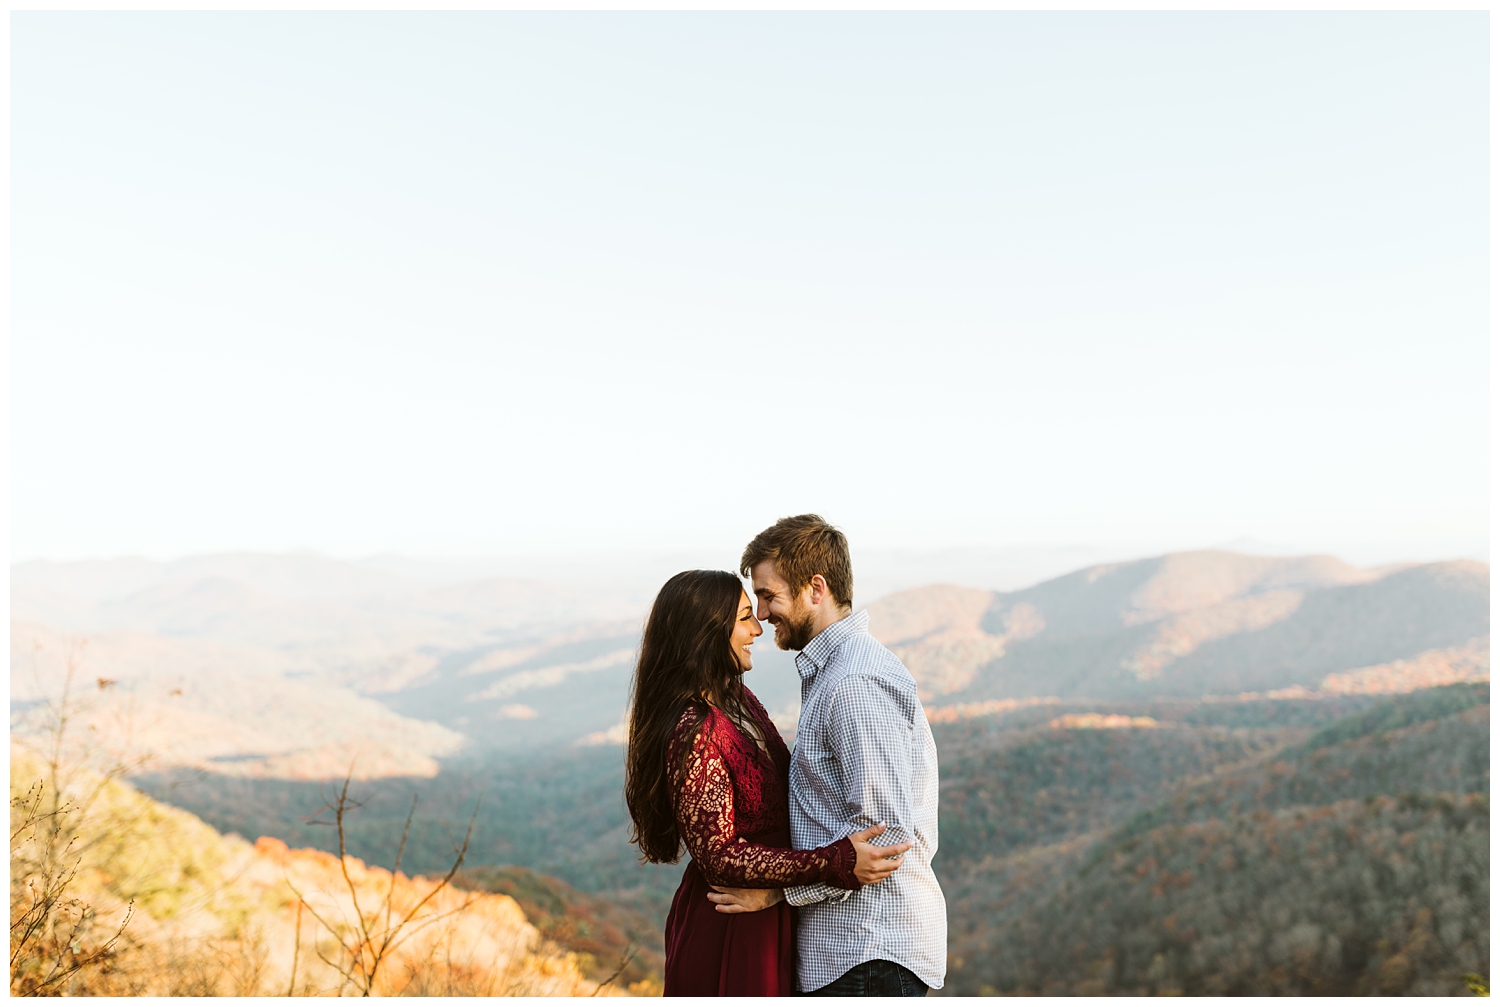 Fall Engagement Session on the Appalachian Trail in the North Georgia Mountains